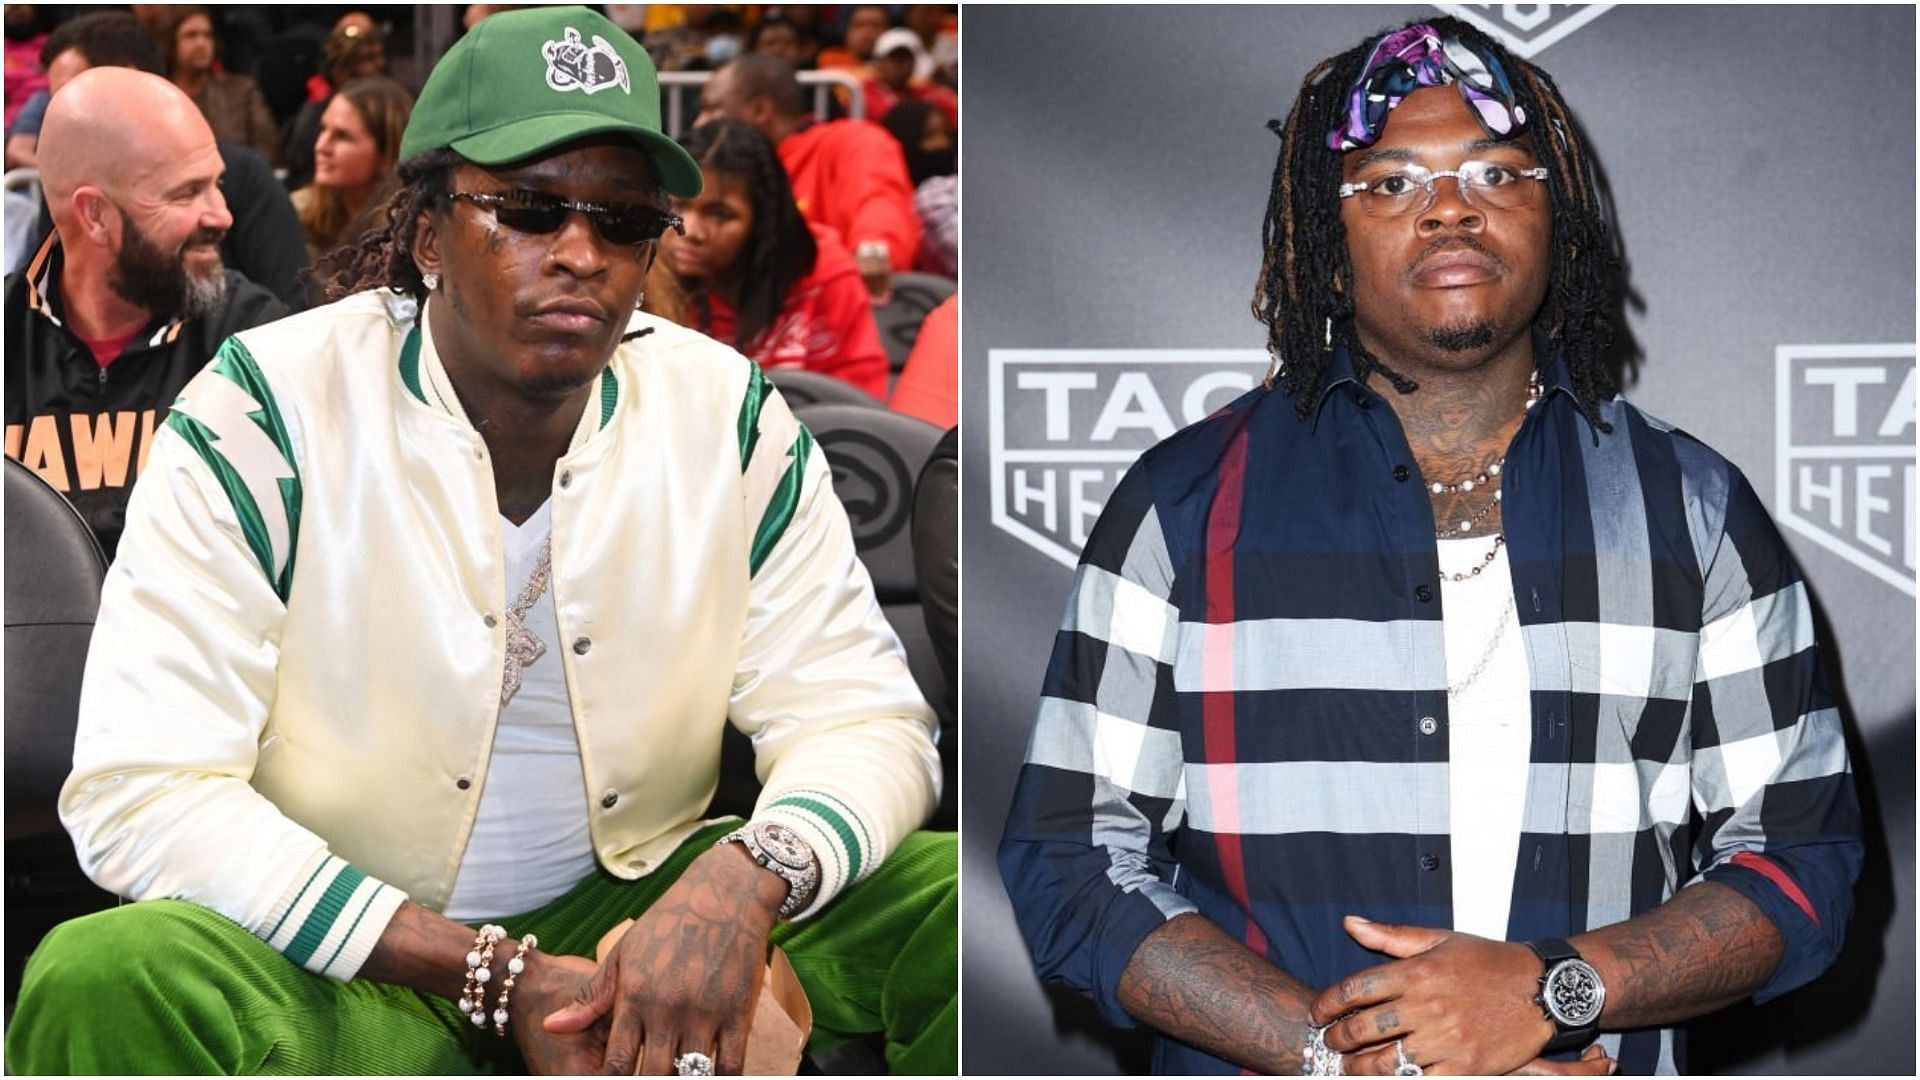 Young Thug and Gunna were recently arrested in Atlanta (Images via Paras Griffin and John Parra/Getty Images)